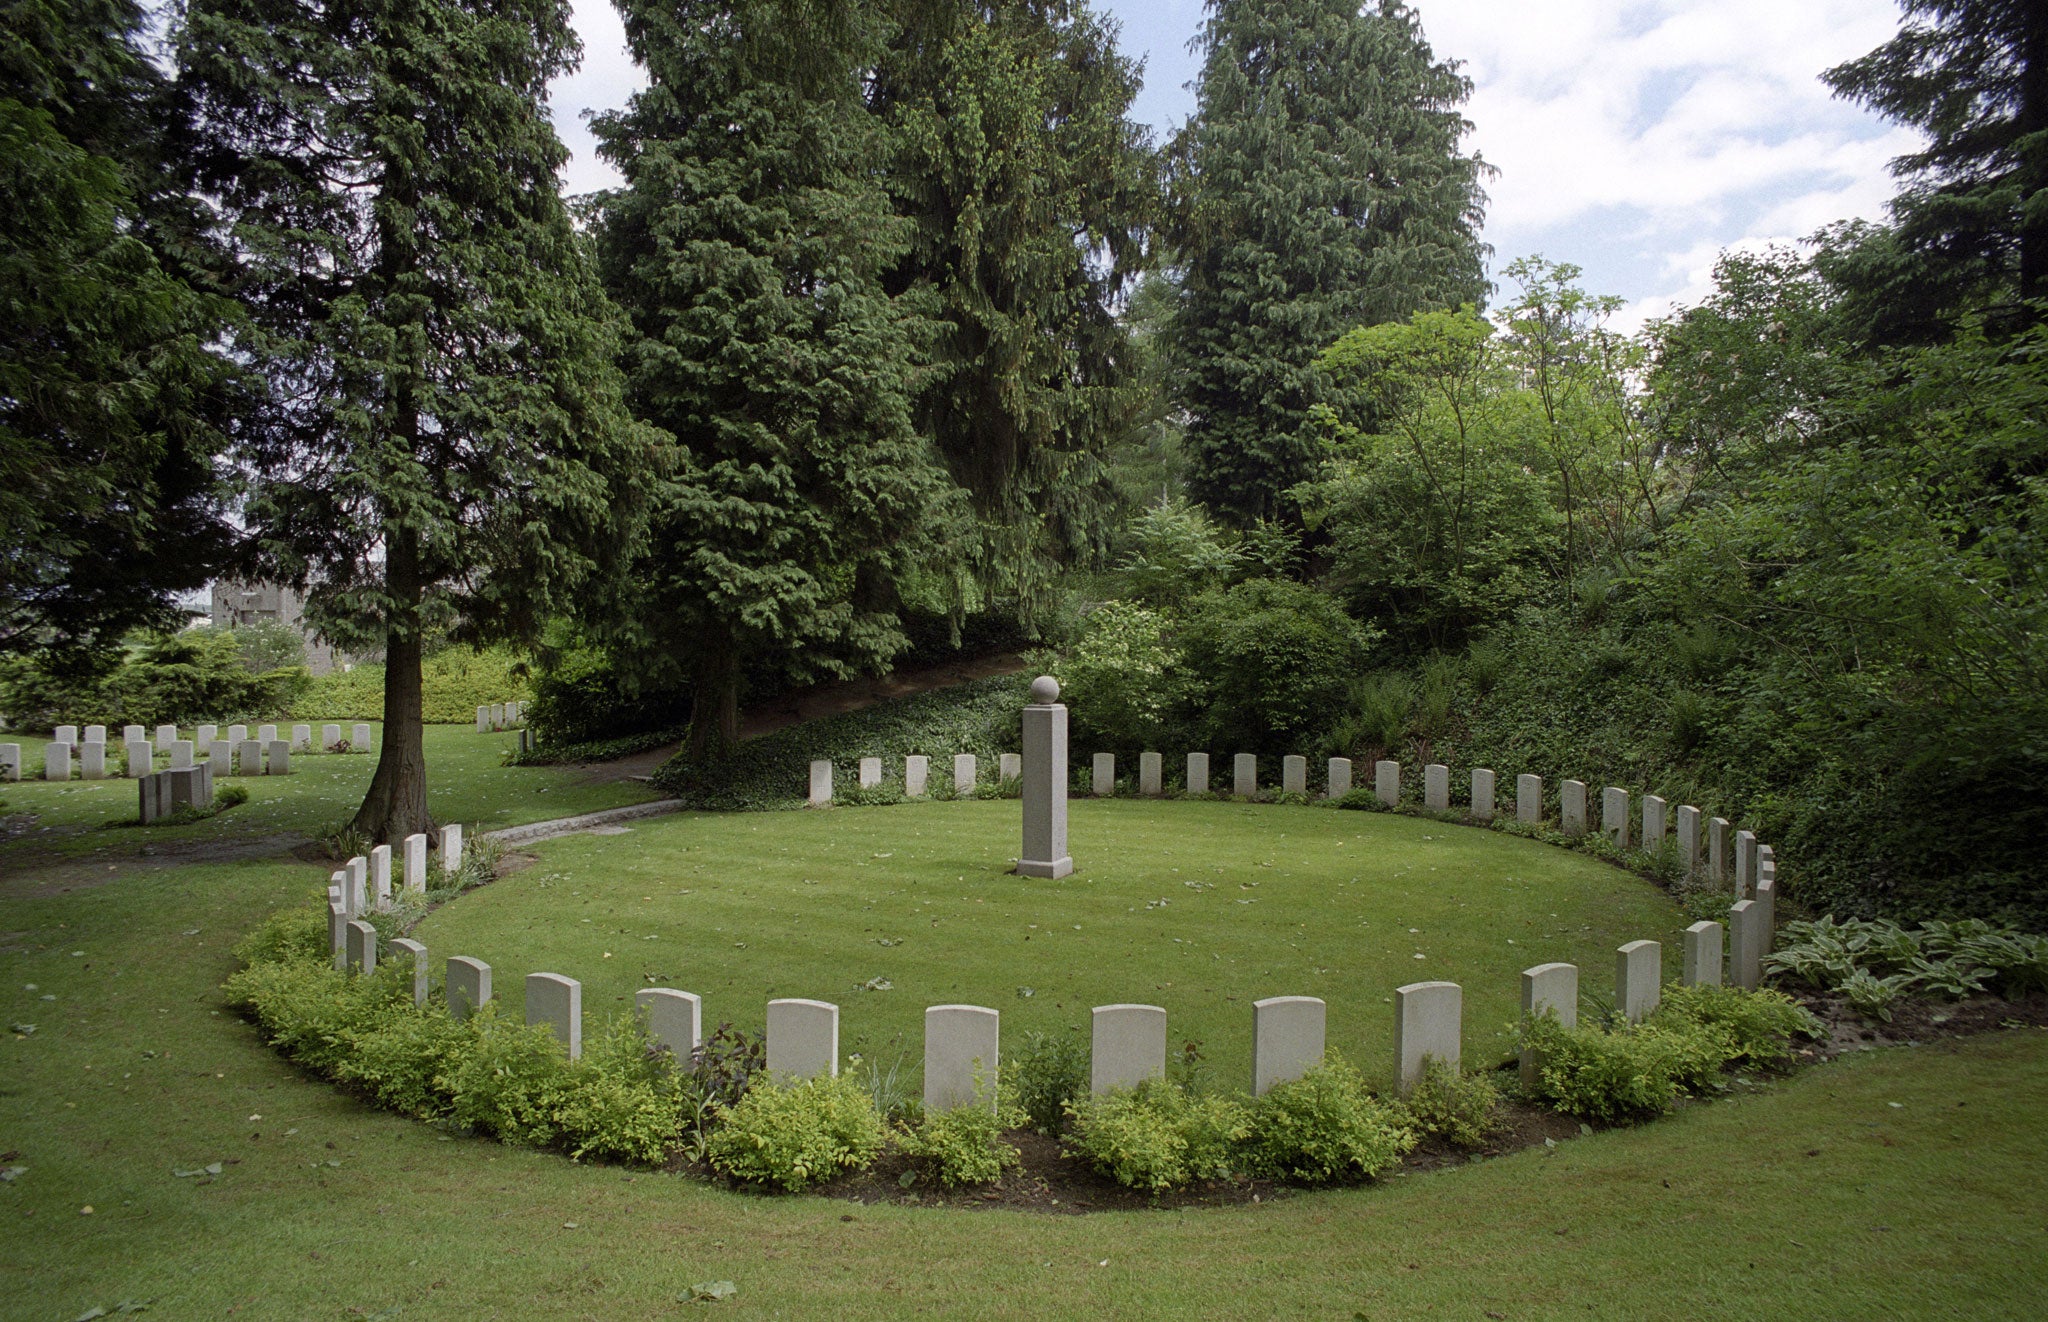 The graves of 46 British soldiers of the Royal Middlesex Regiment, at Saint-Symphorien